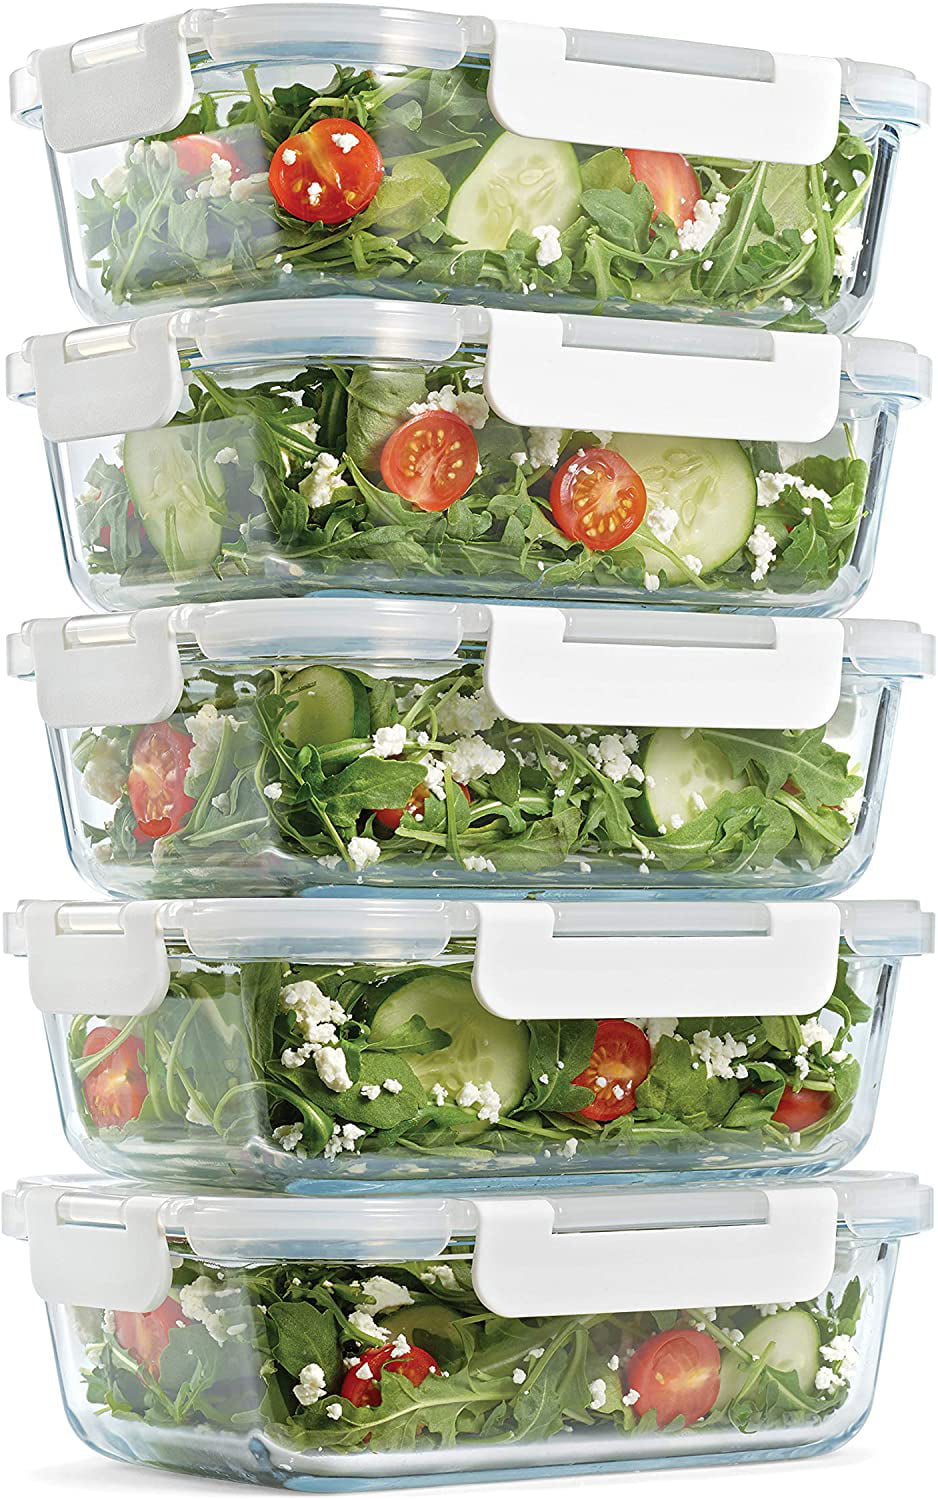 NEW Fit & Fresh Junior Lunchers Chilled Container Set w/Removable Ice Packs-14 